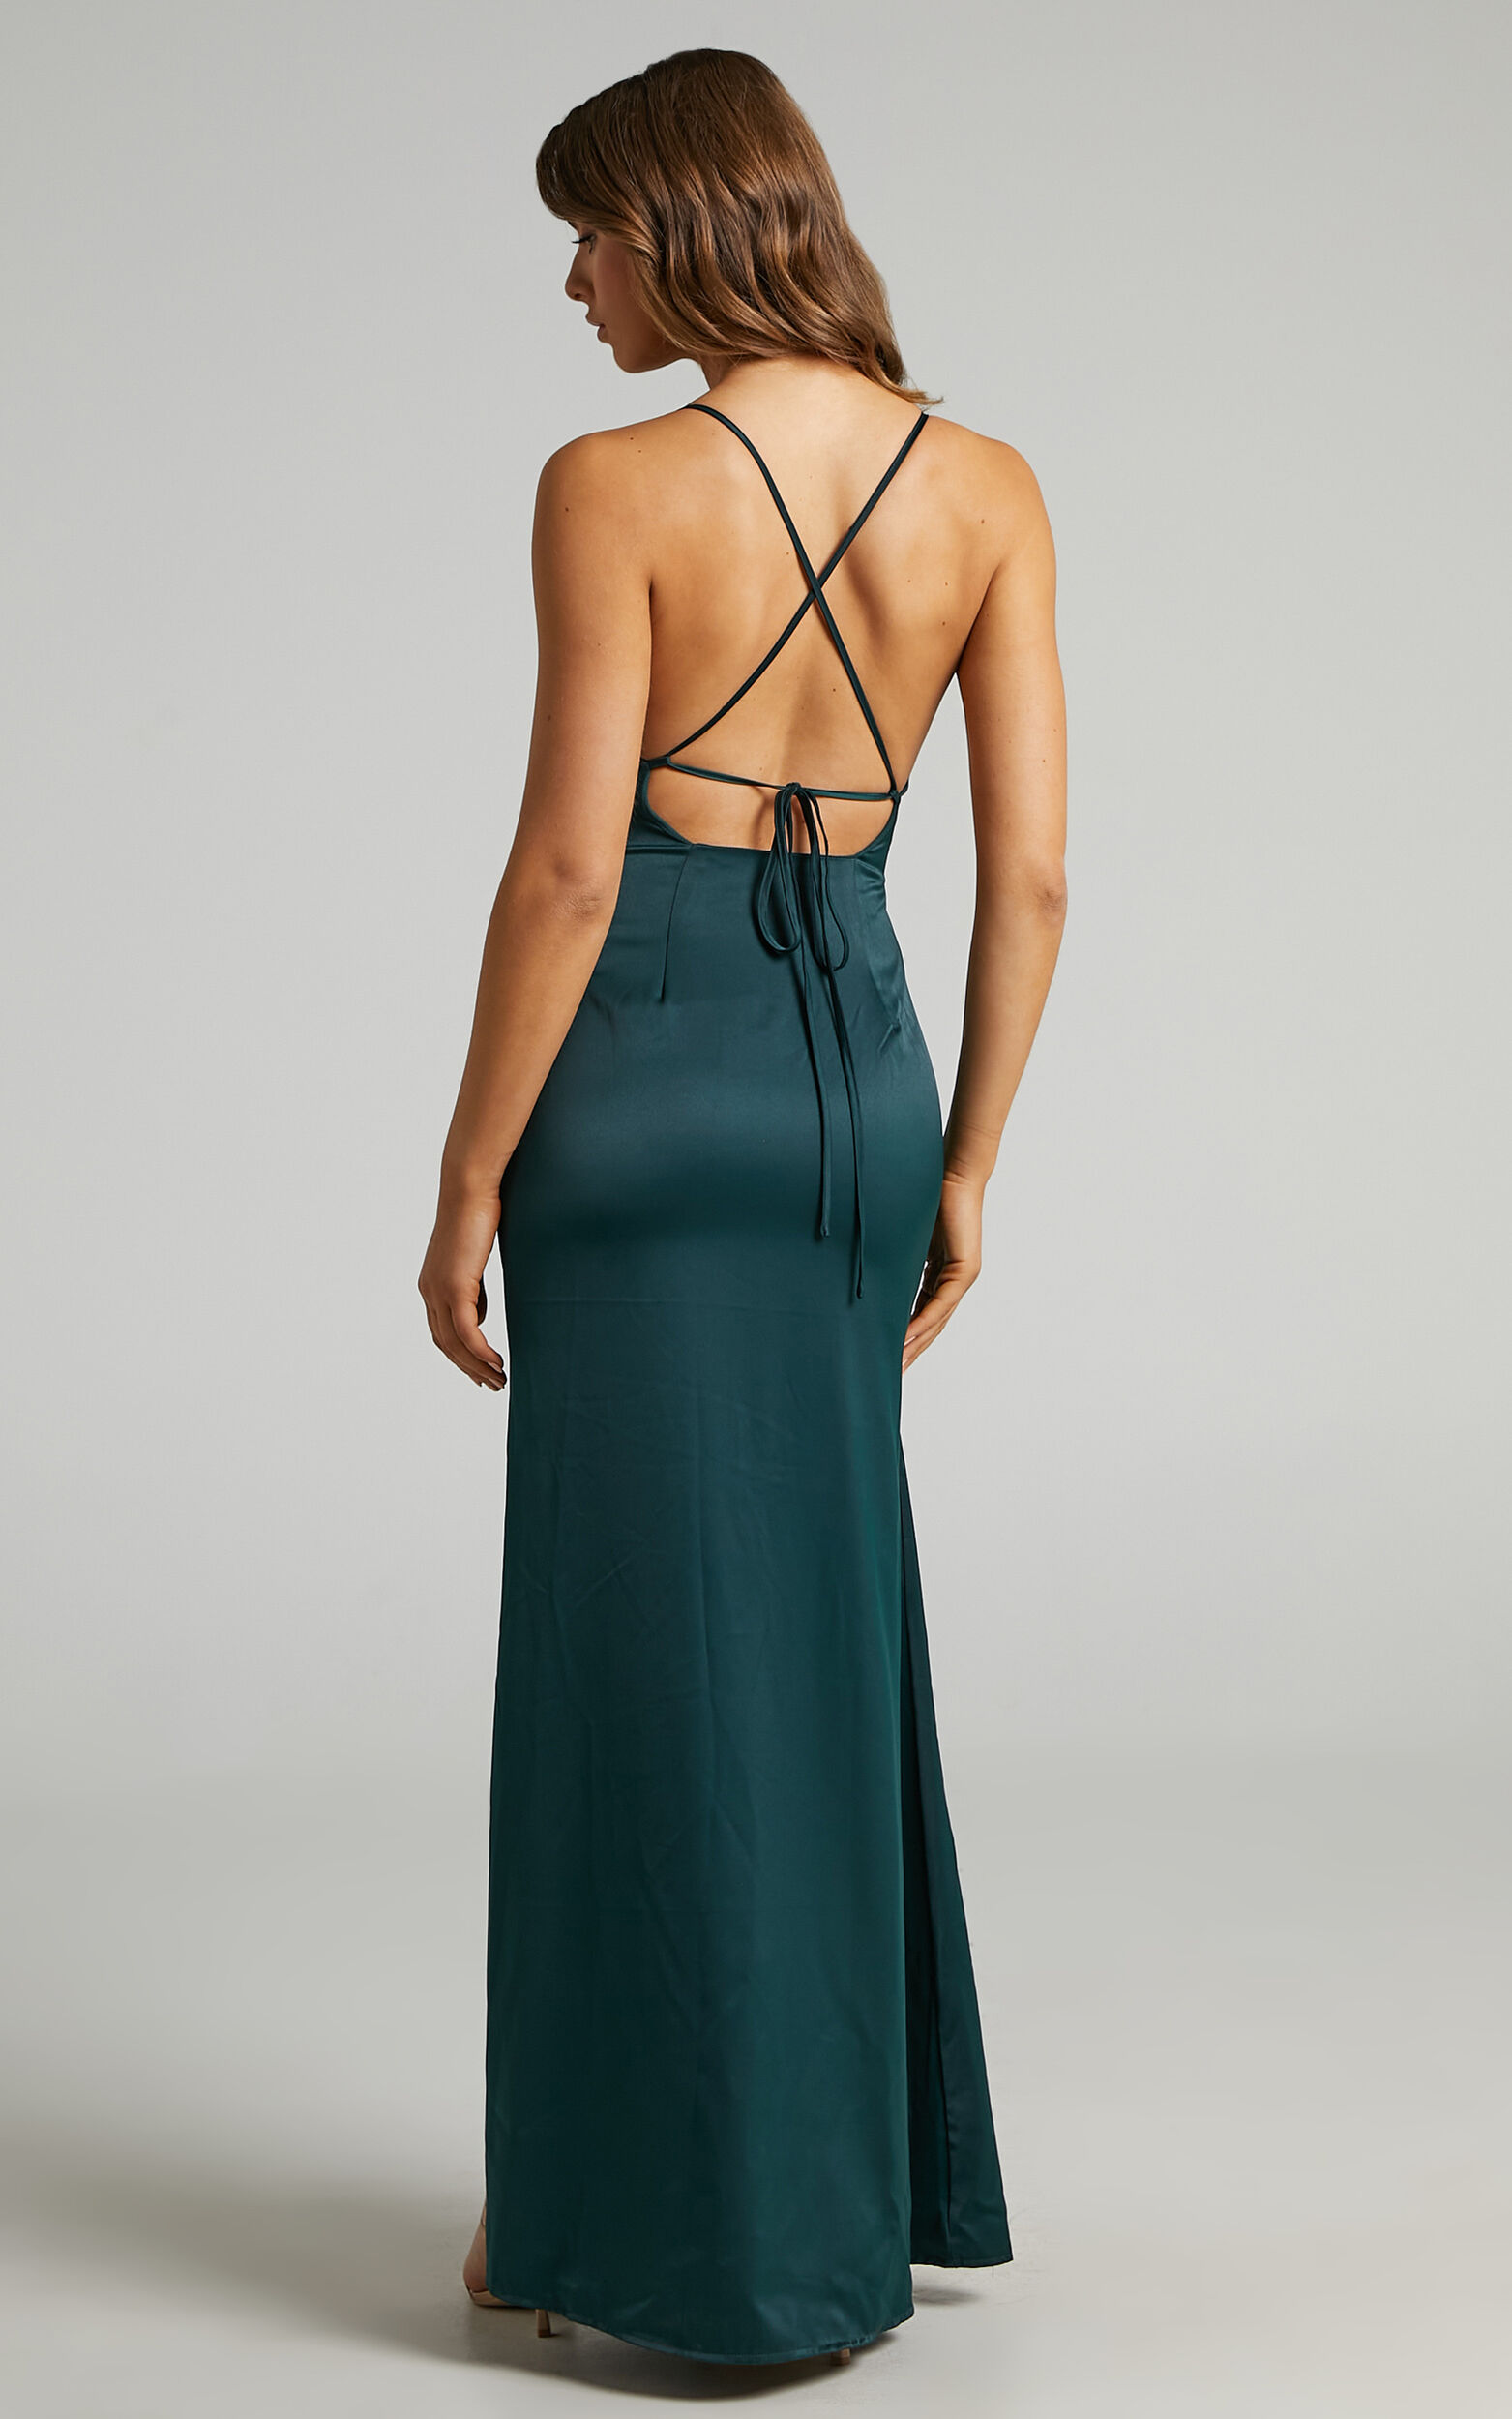 A Final Toast Dress in Emerald Satin - 06, GRN3, super-hi-res image number null